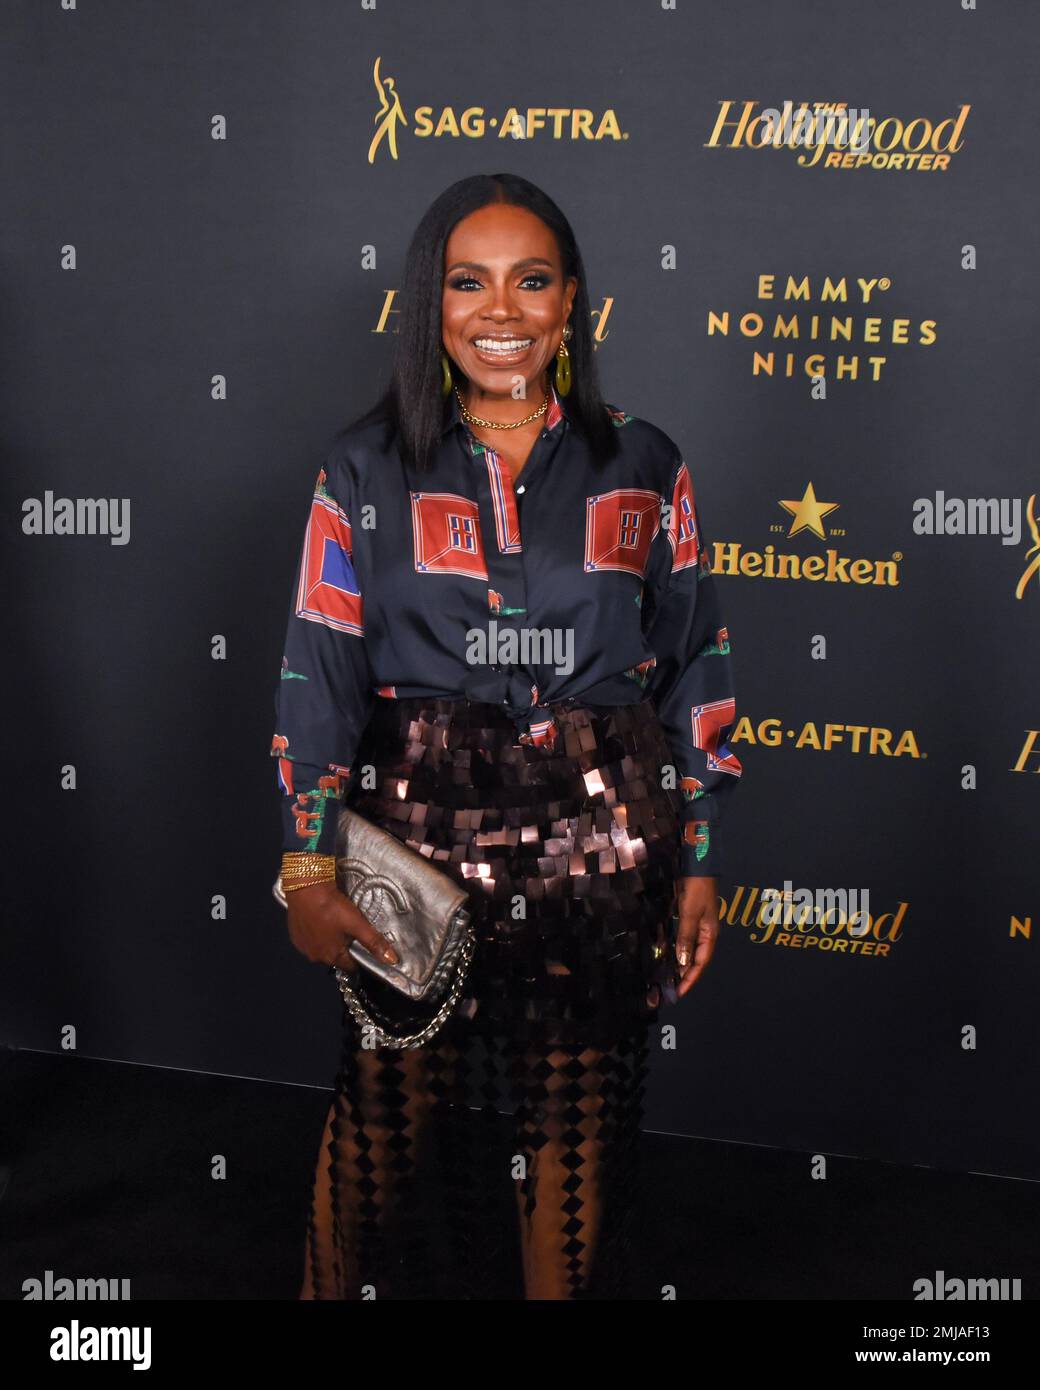 Sheryl Lee Ralph attends The Hollywood Reporter and SAG-AFTRA’s Emmy Nominees Night. Photo: Michael Mattes/michaelmattes.co Stock Photo